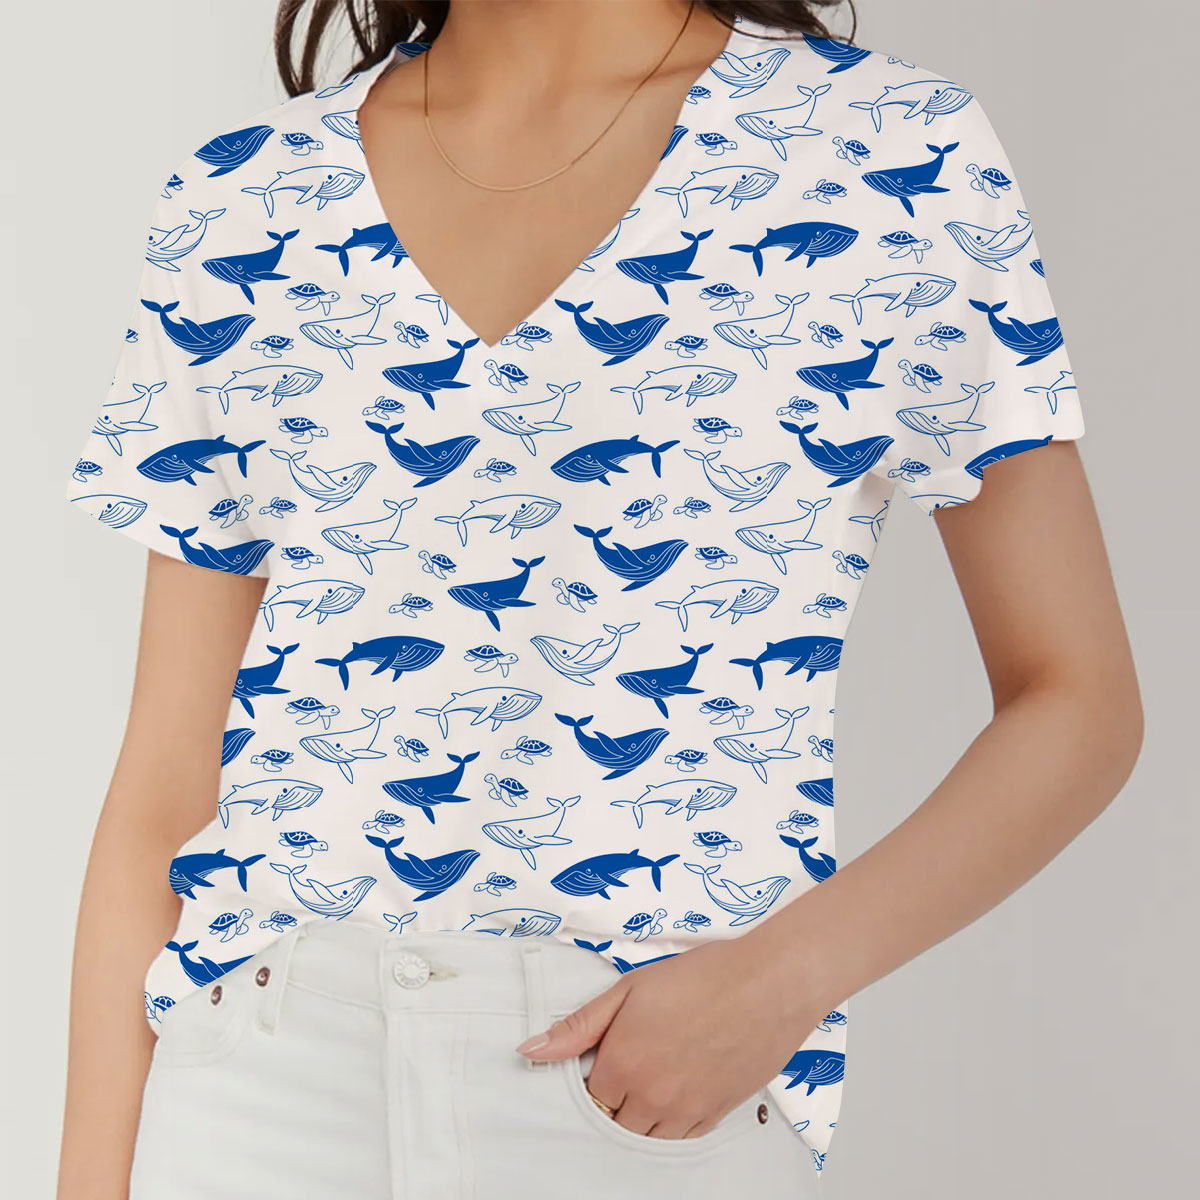 Blue Whale And White V-Neck Women's T-Shirt